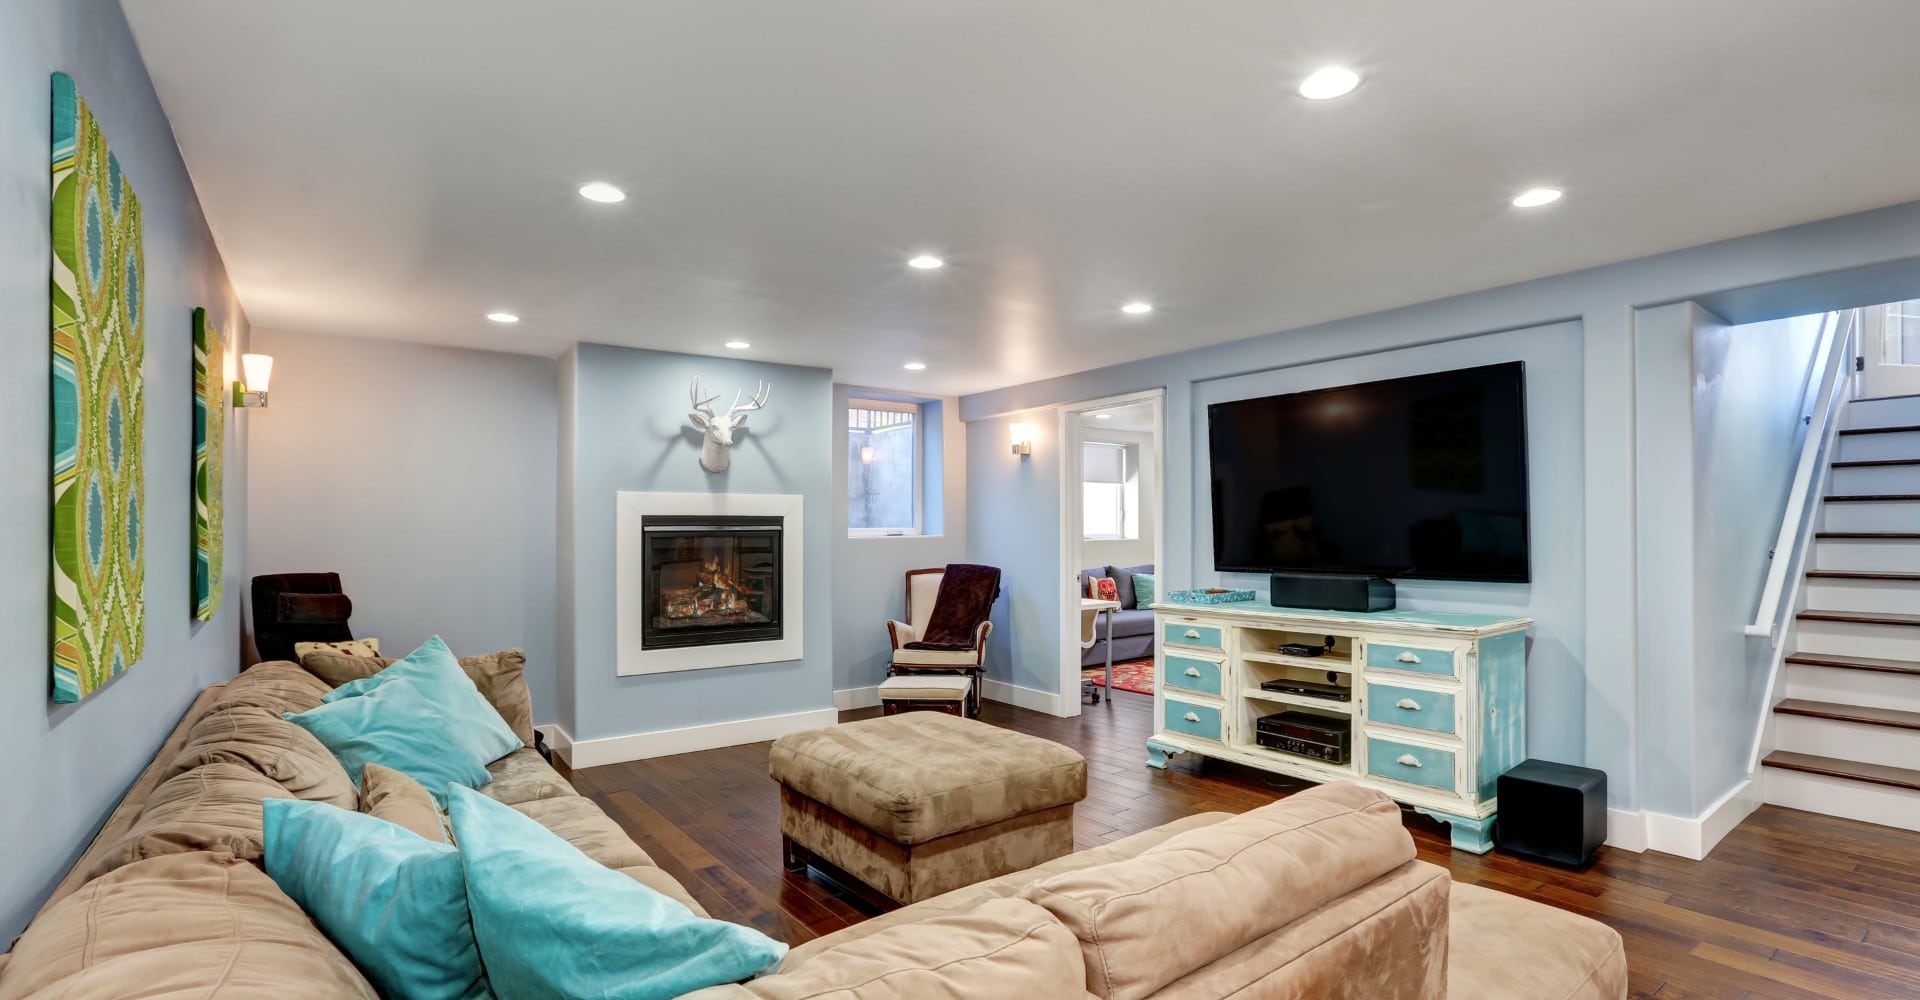 Basement Finishing 101: How to Brighten Up Your Space